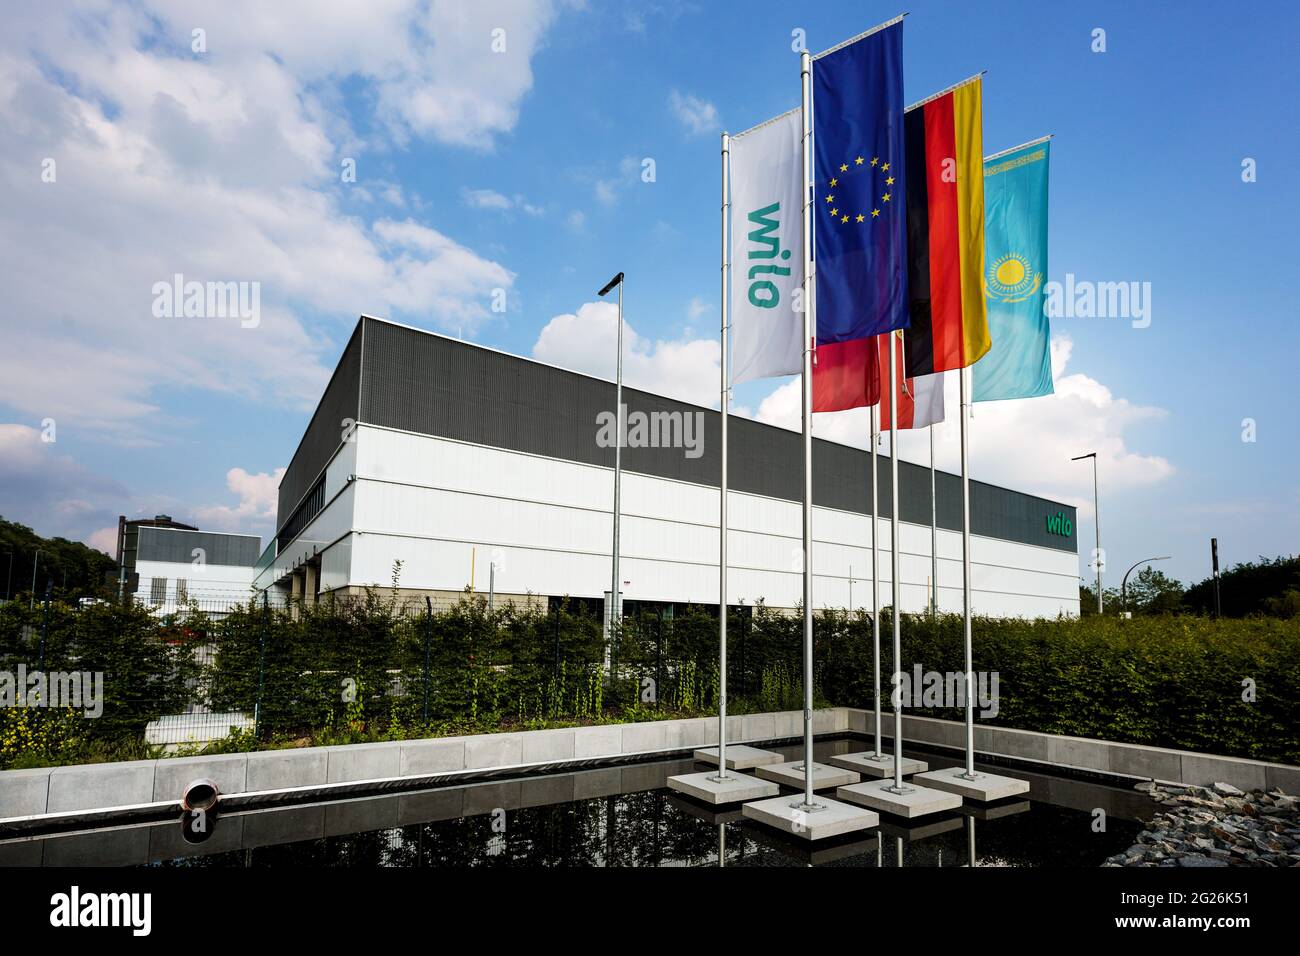 Ironisk Faktisk Ud Wilo High Resolution Stock Photography and Images - Alamy